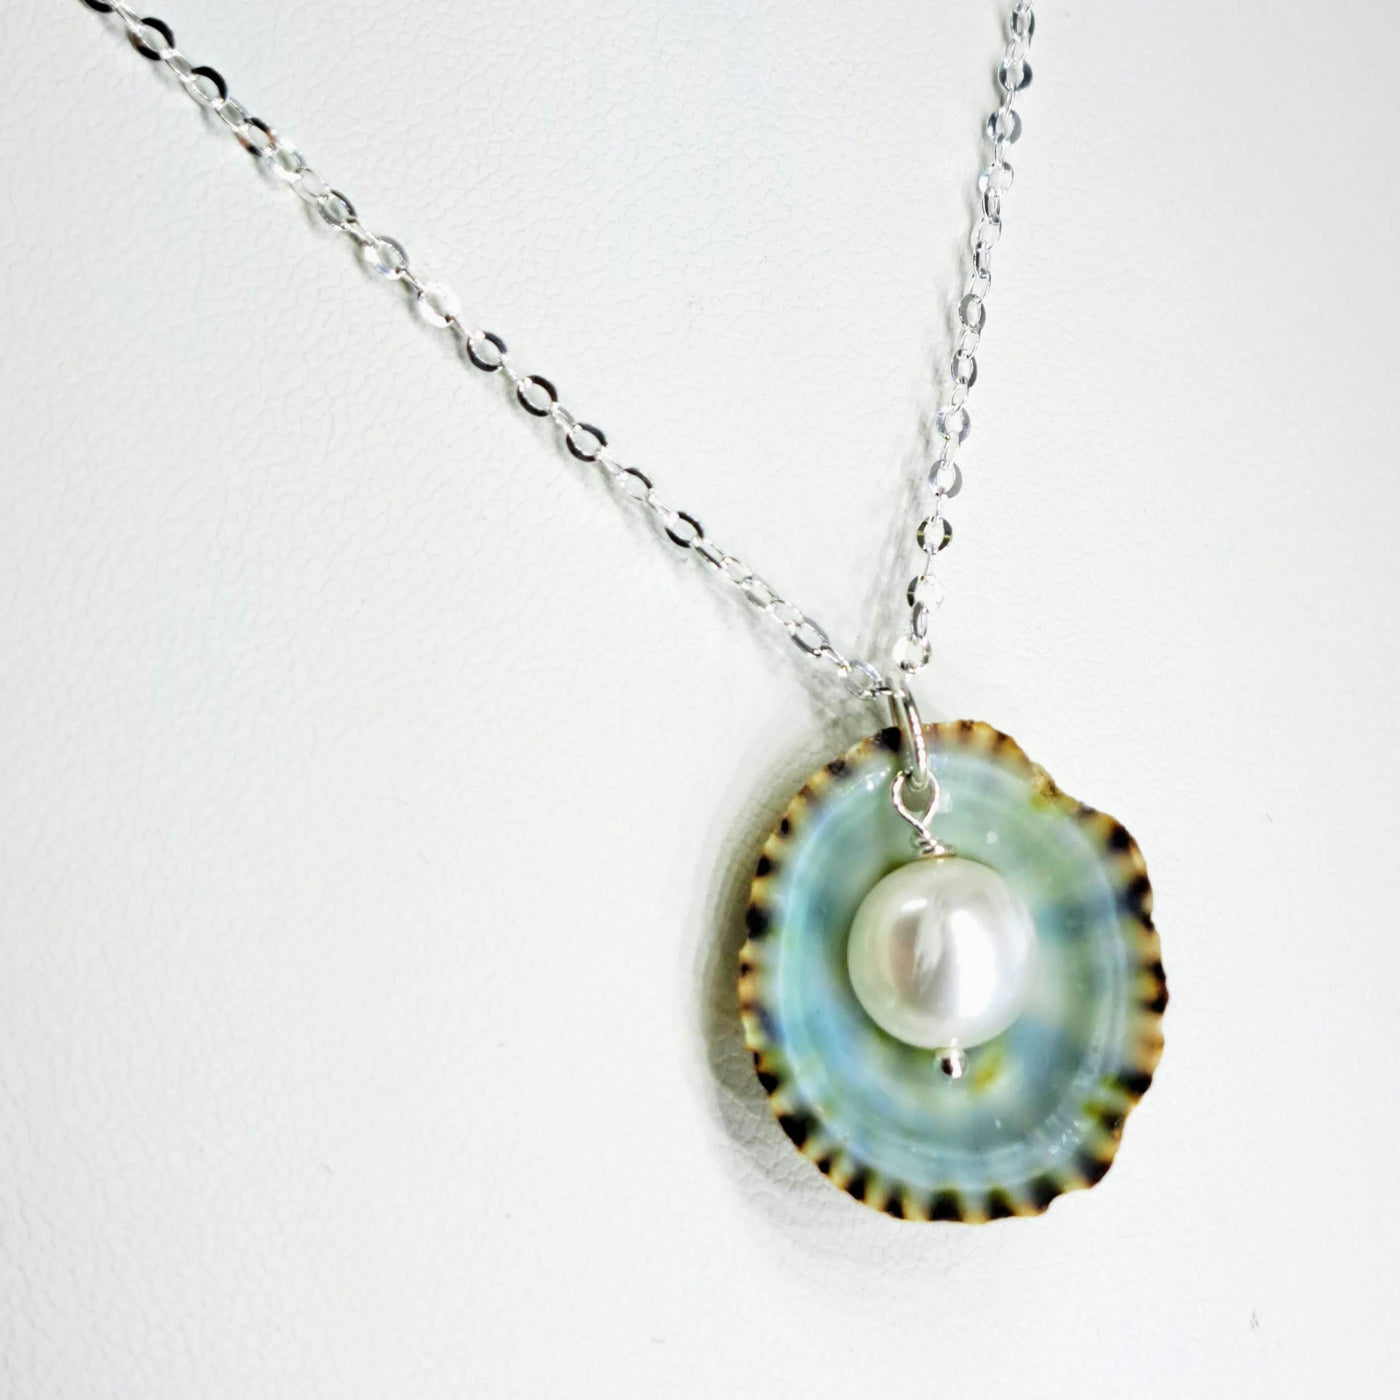 "Limpet Pool" 18" Pendant Necklace - Limpet Shell, Pearl, Sterling